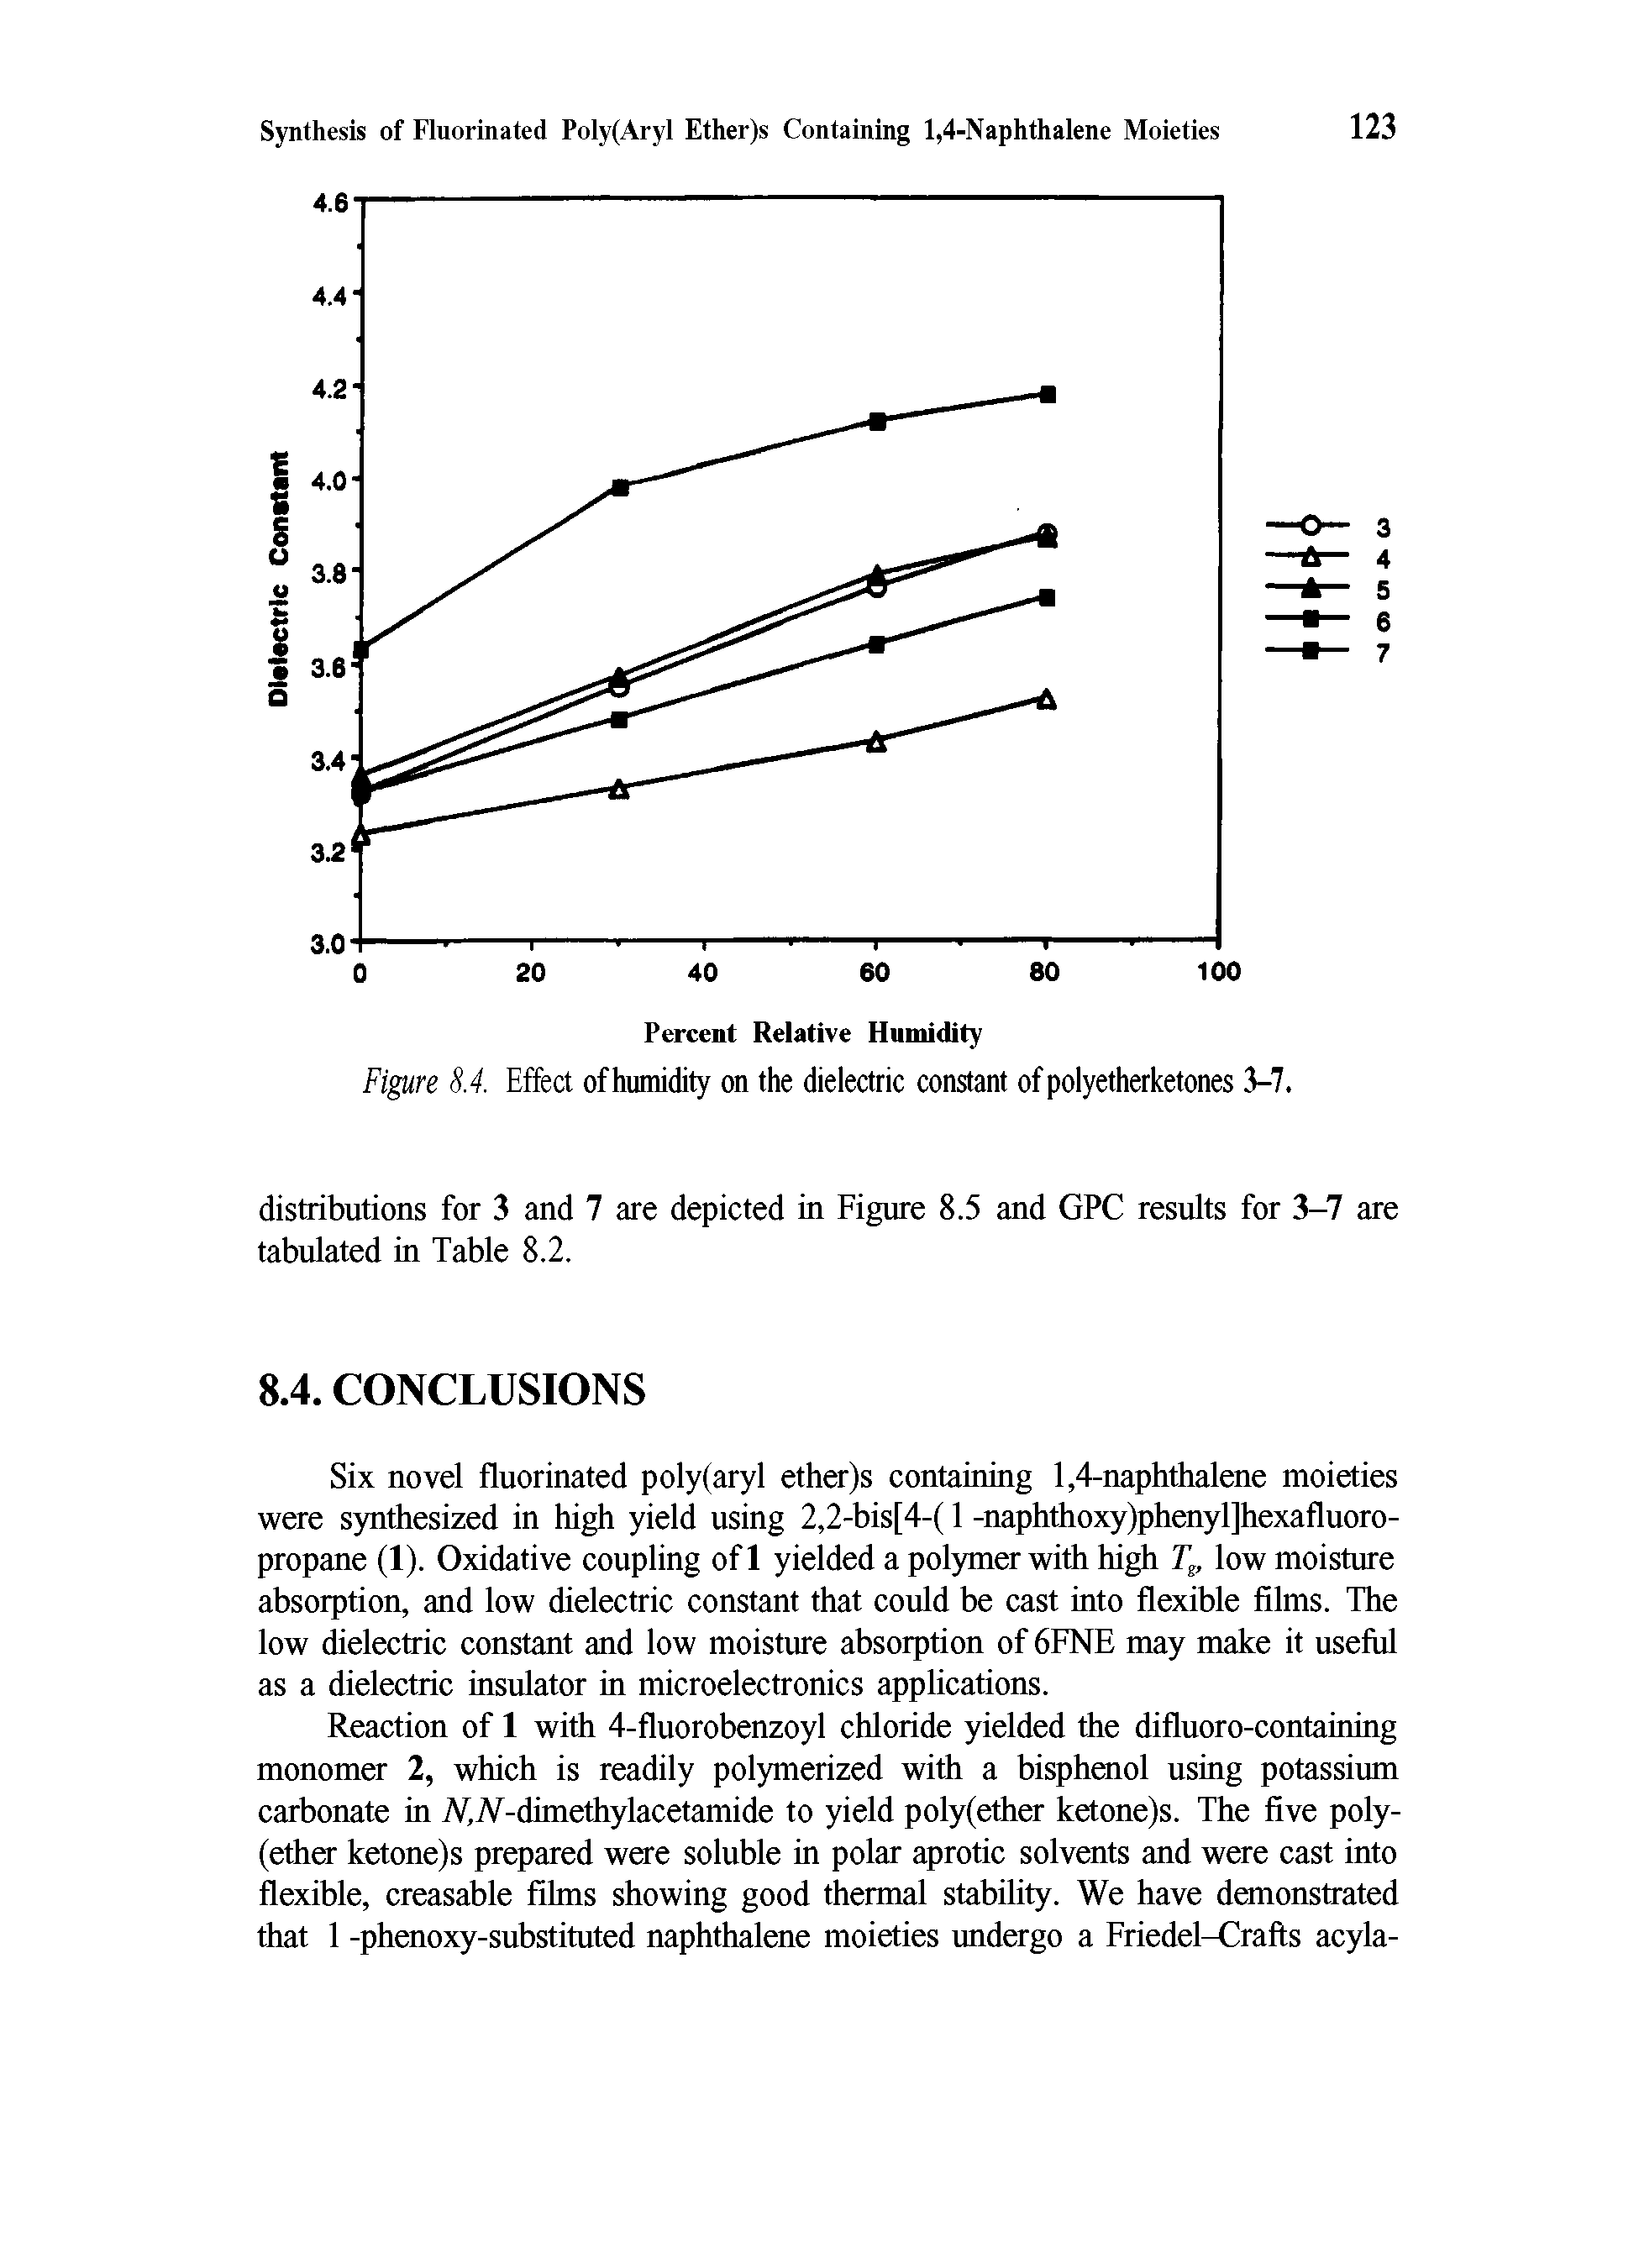 Figure 8.4. Effect of humidity on the dielectric constant of polyetherketones 3-7.